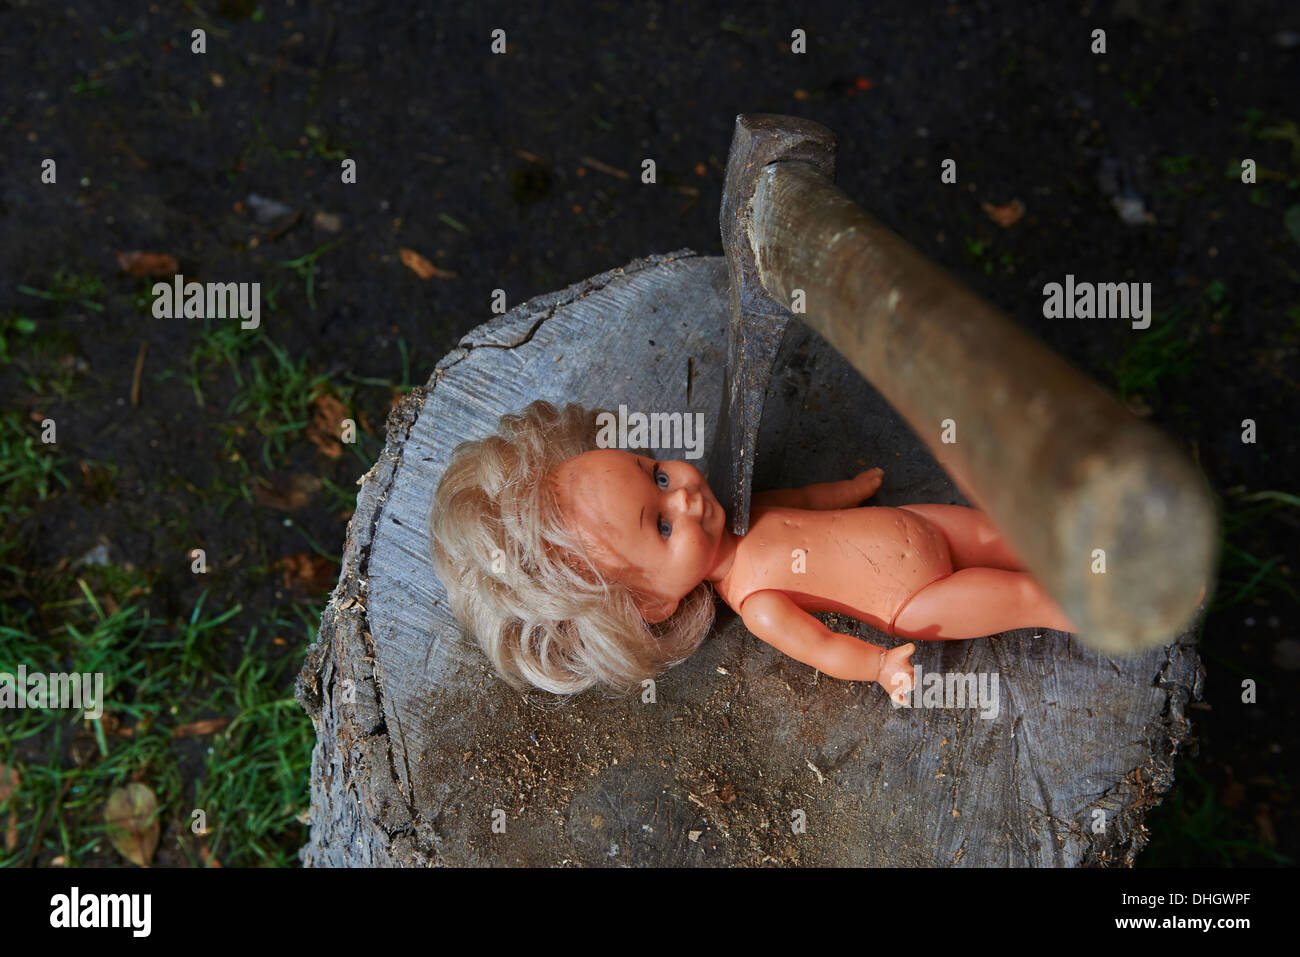 Execution - murder of child toy plastic baby doll with an ax, beheaded Stock Photo